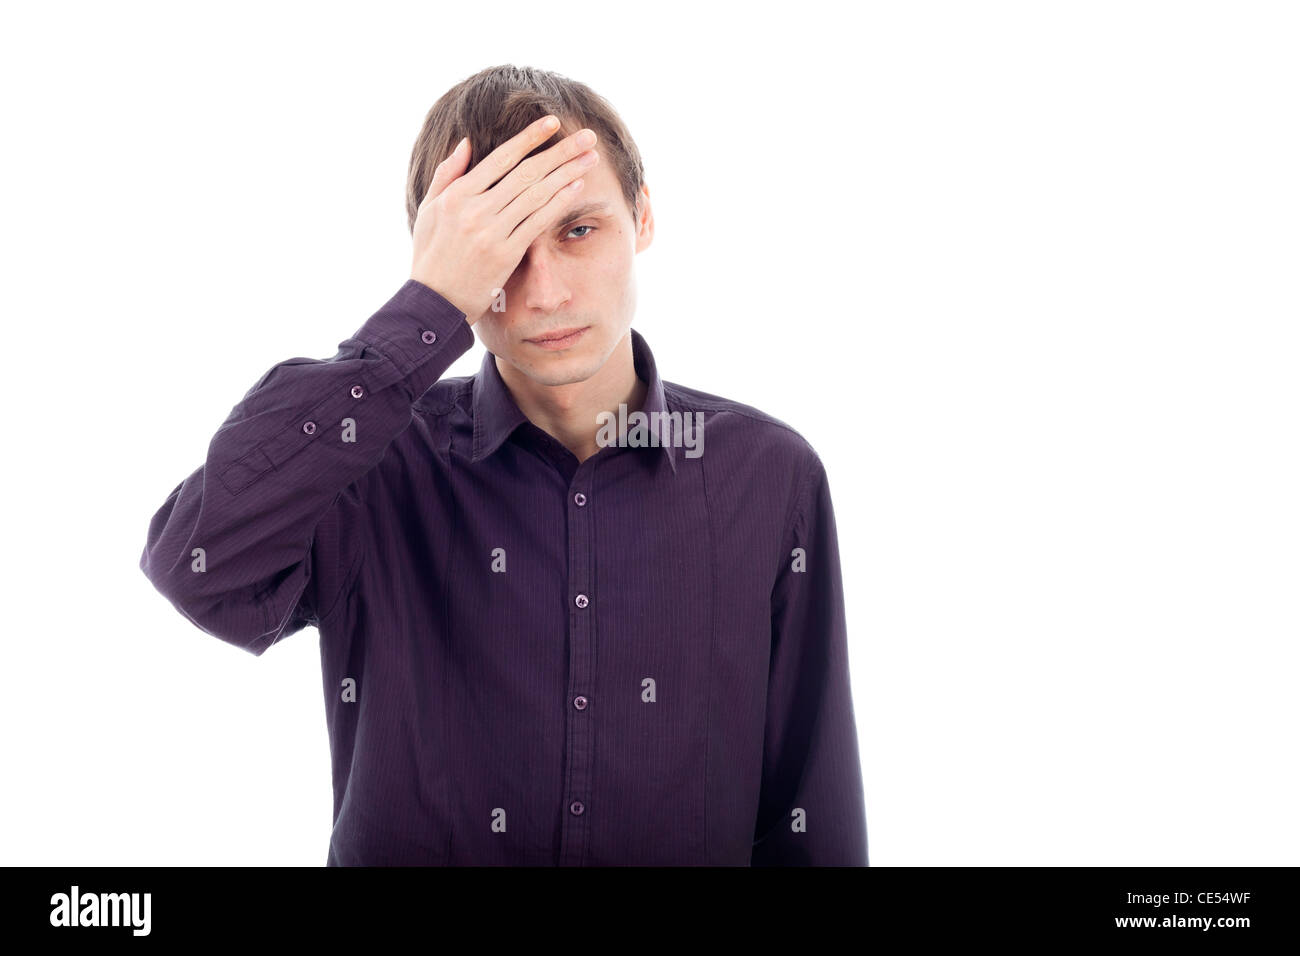 Portrait of man with headache, touching his head. Isolated on white background. Stock Photo